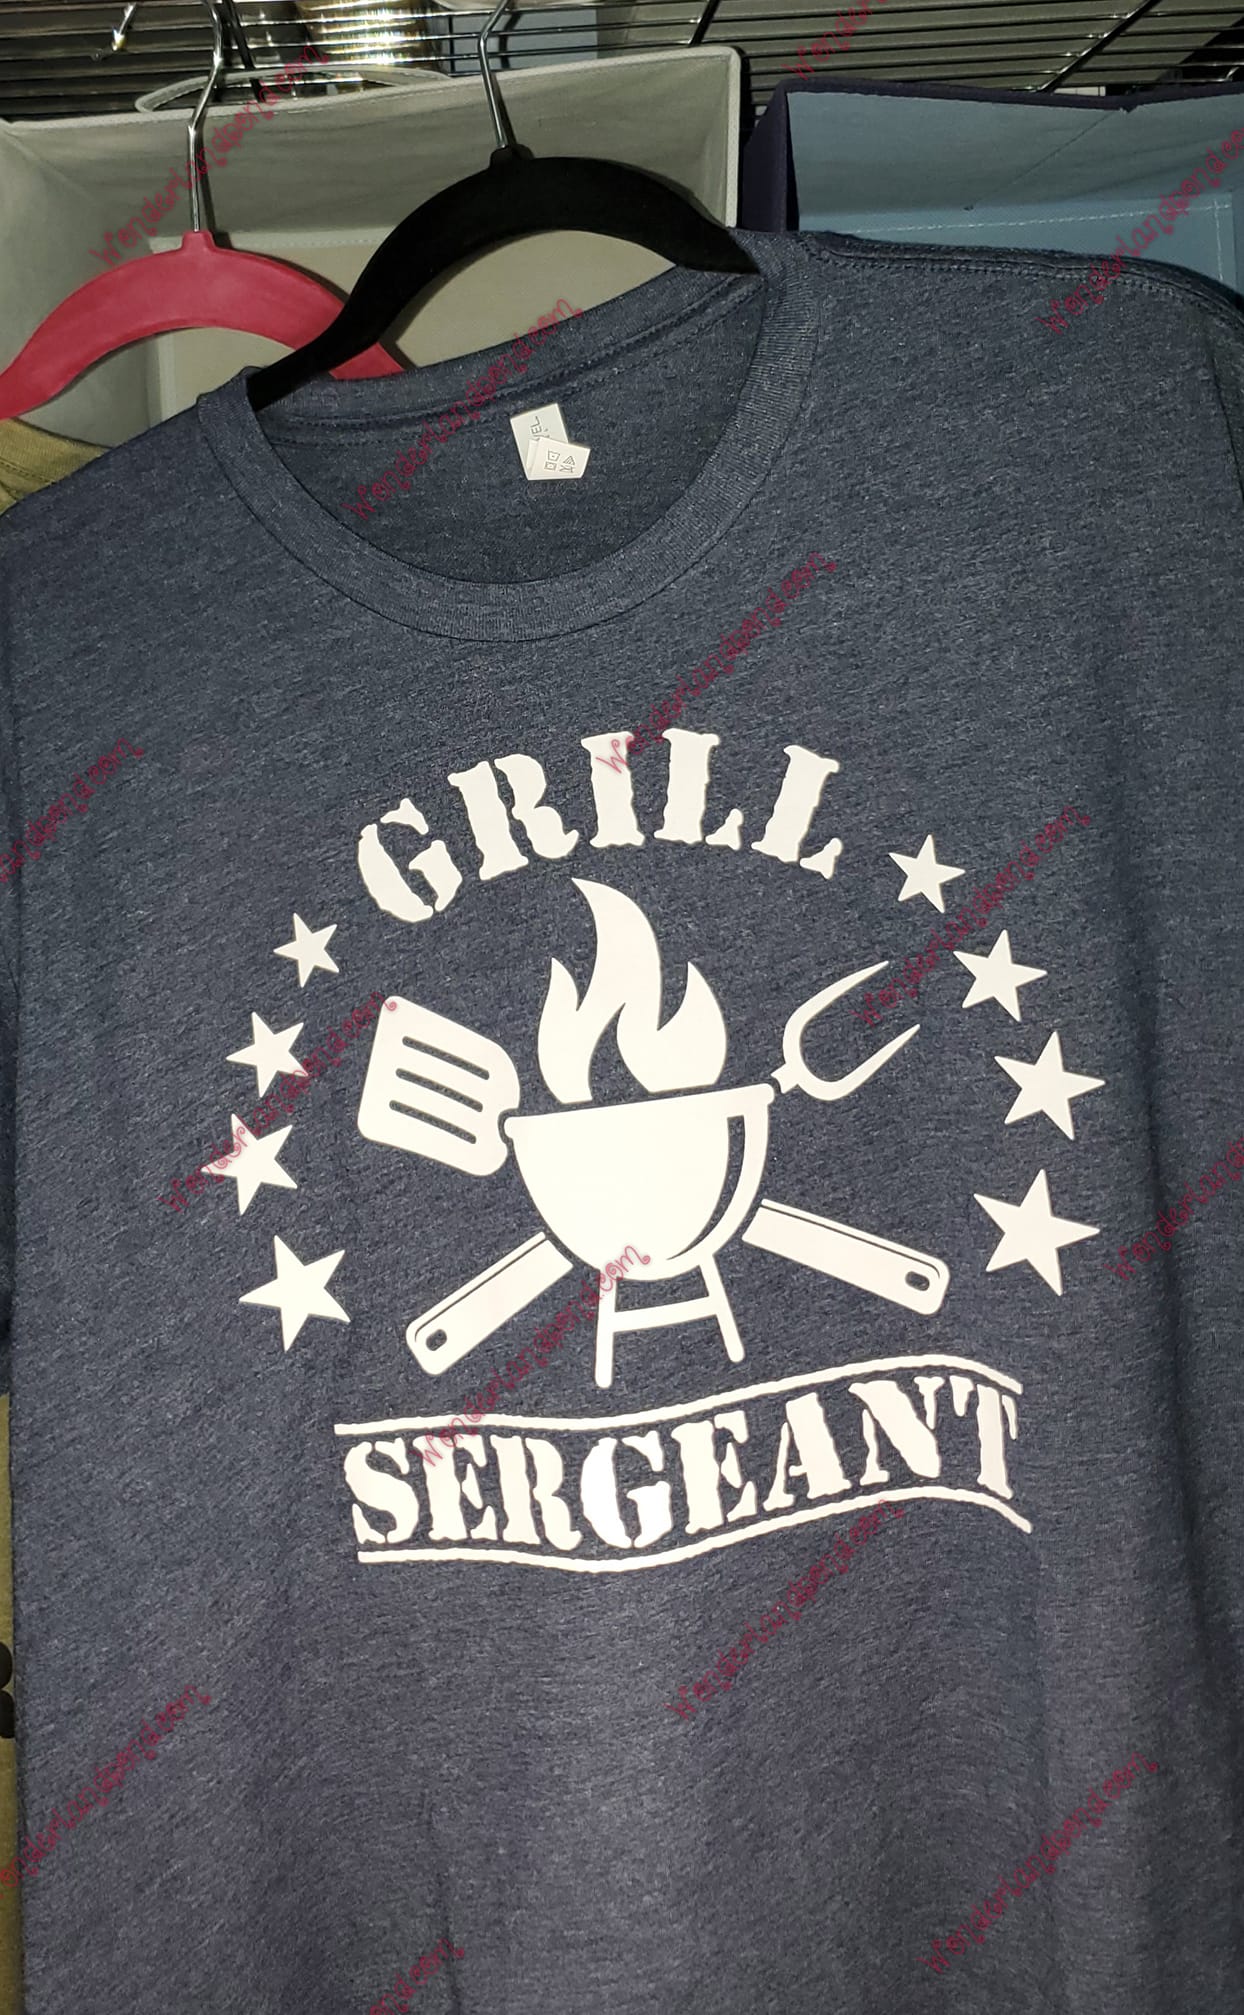 Grill Sergeant (Limited Edition)